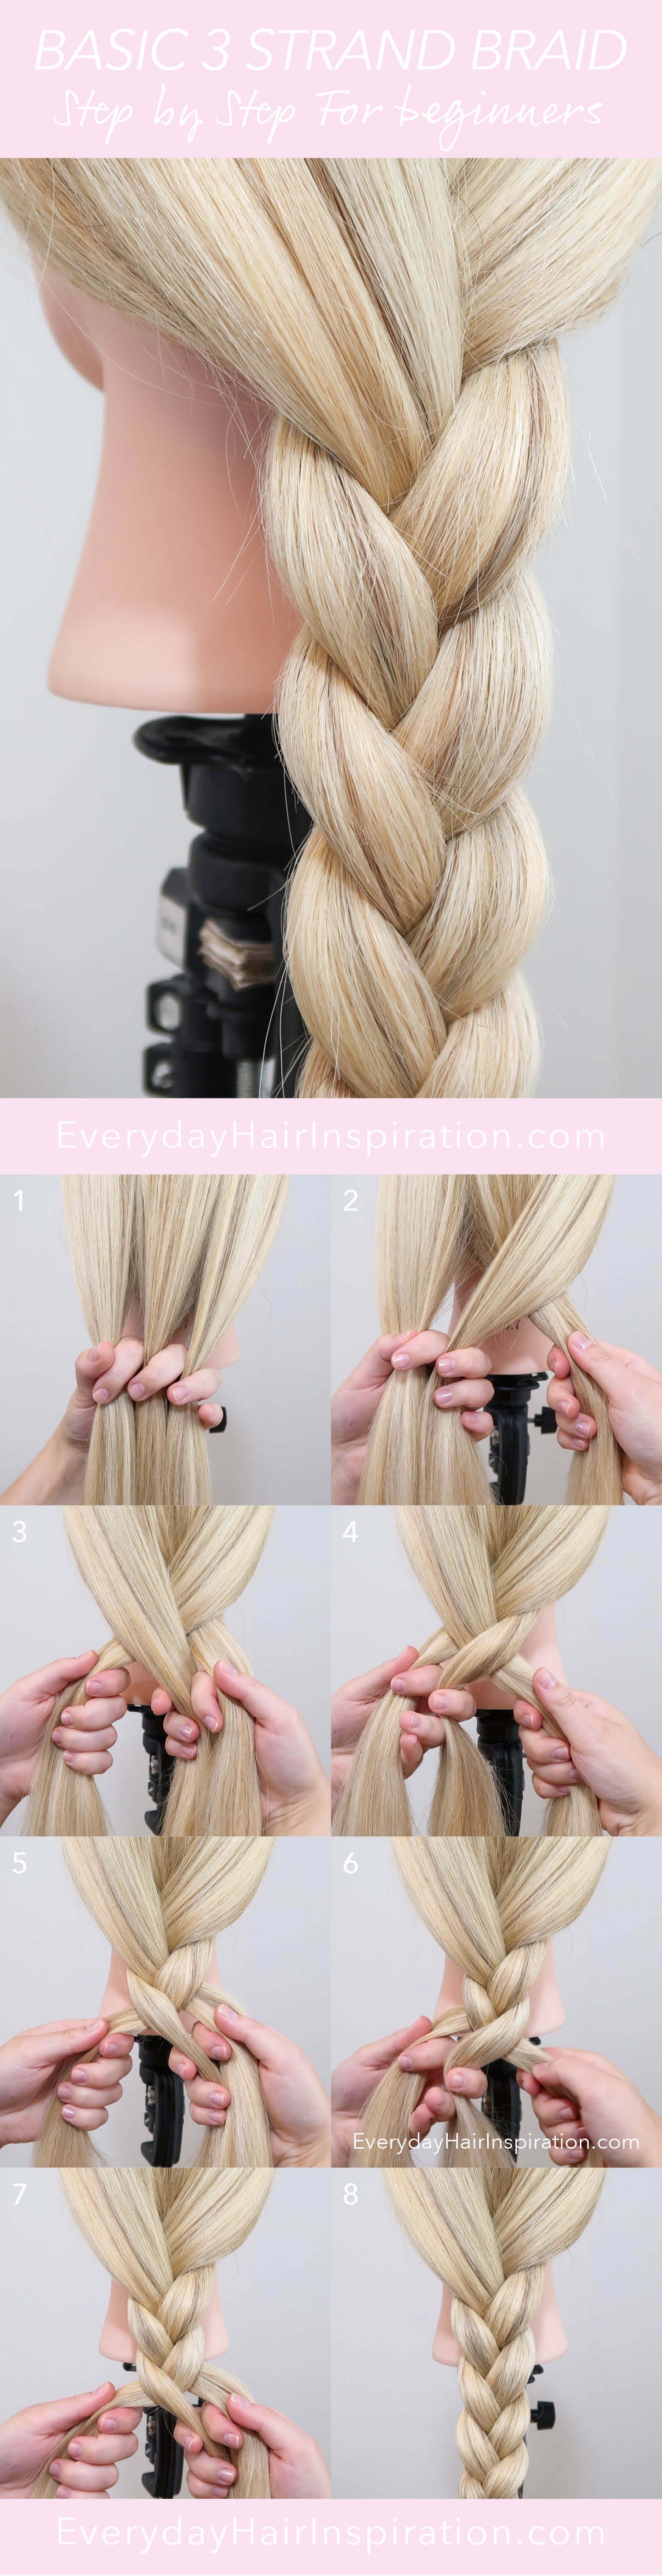 3 Strand Braid How To Braid Hair For Complete Beginners Everyday Hair Inspiration 